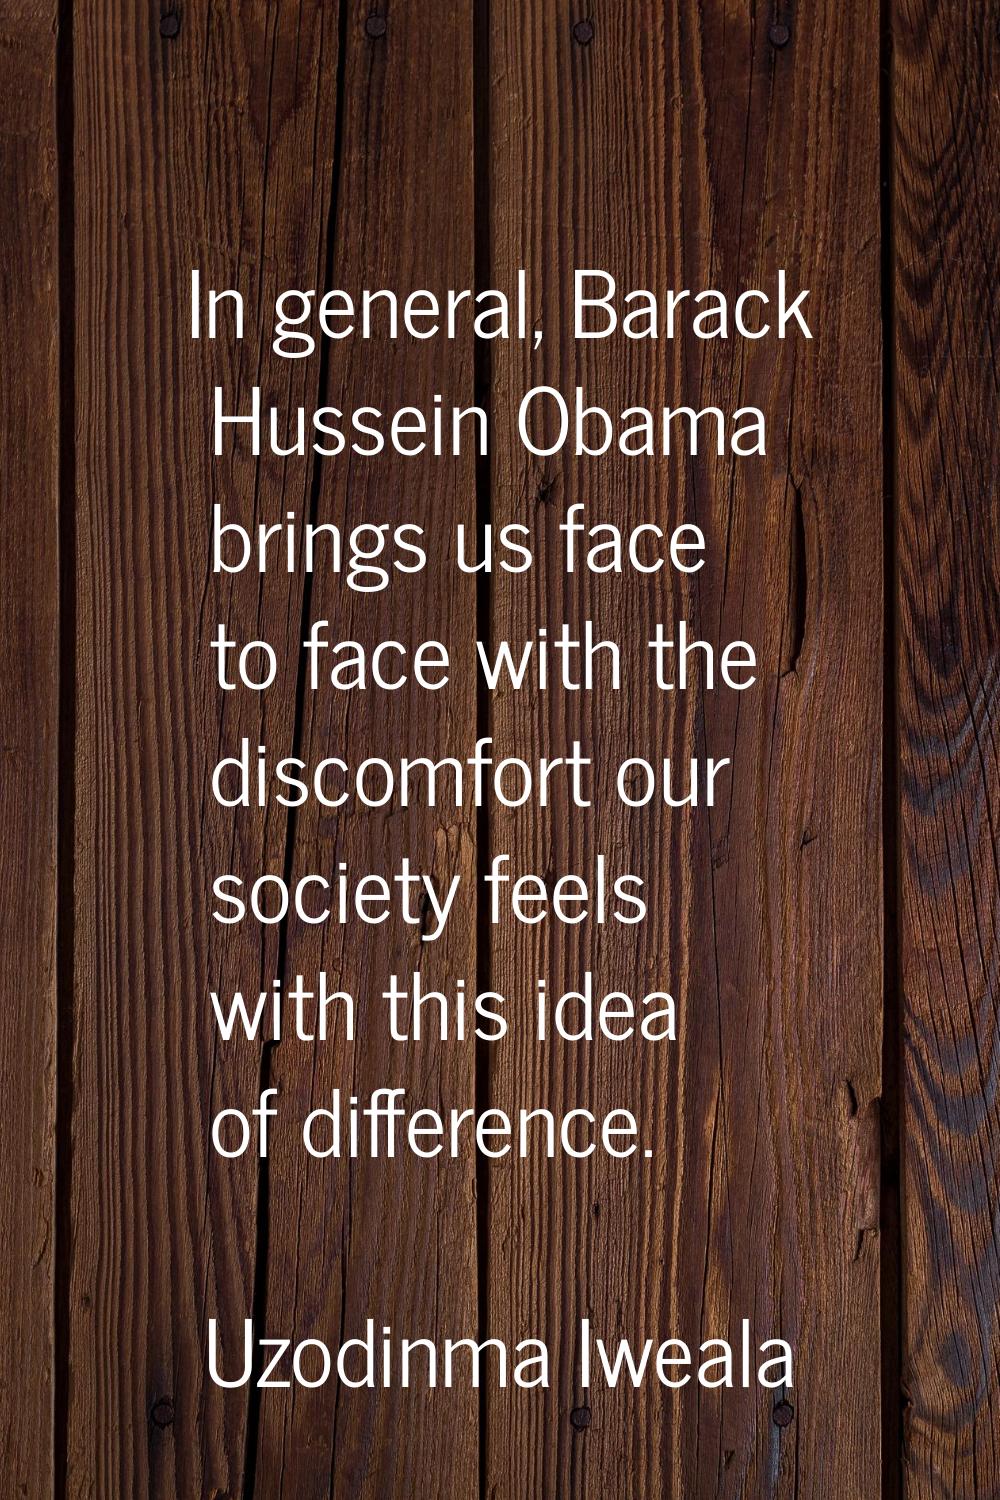 In general, Barack Hussein Obama brings us face to face with the discomfort our society feels with 